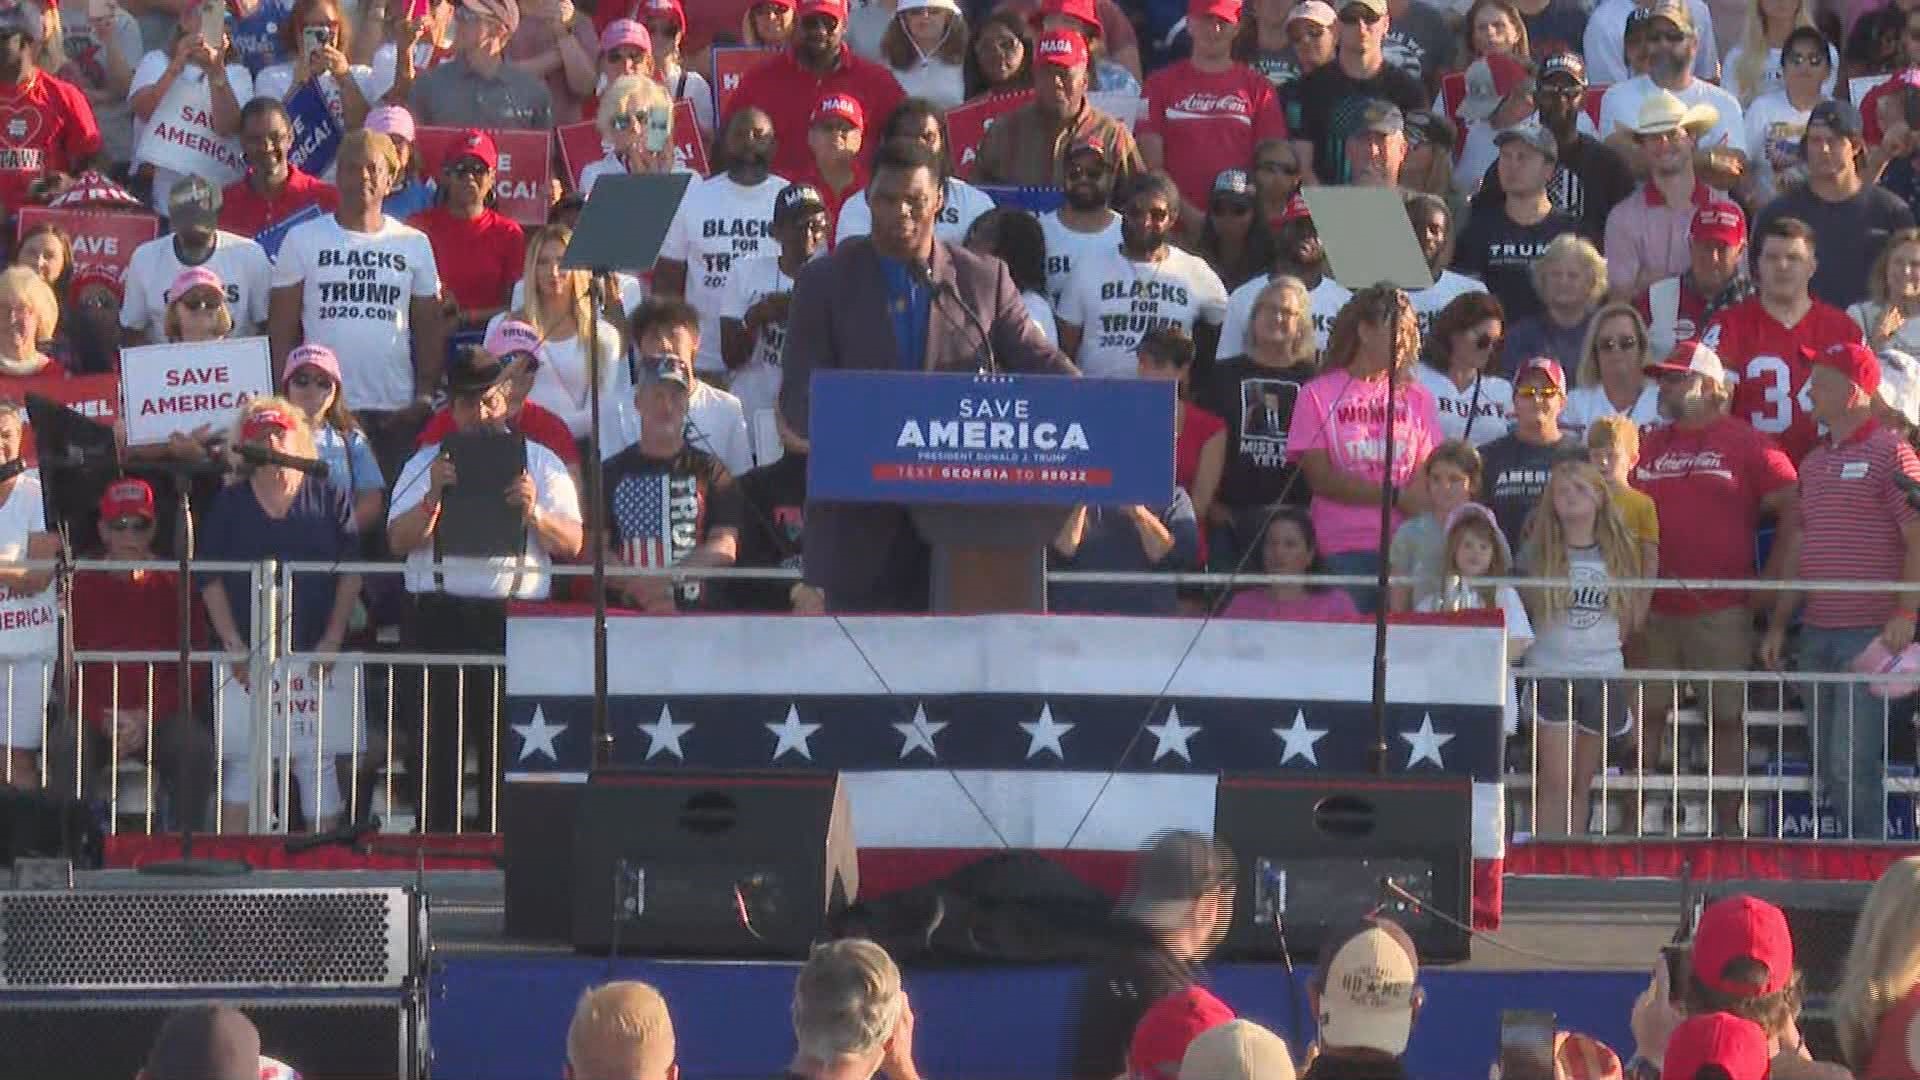 Central Georgia native and UGA legend Herschel Walker, who is now a candidate for U.S. Senate in Georgia, speaks ahead of Trump at Save America rally in Perry.